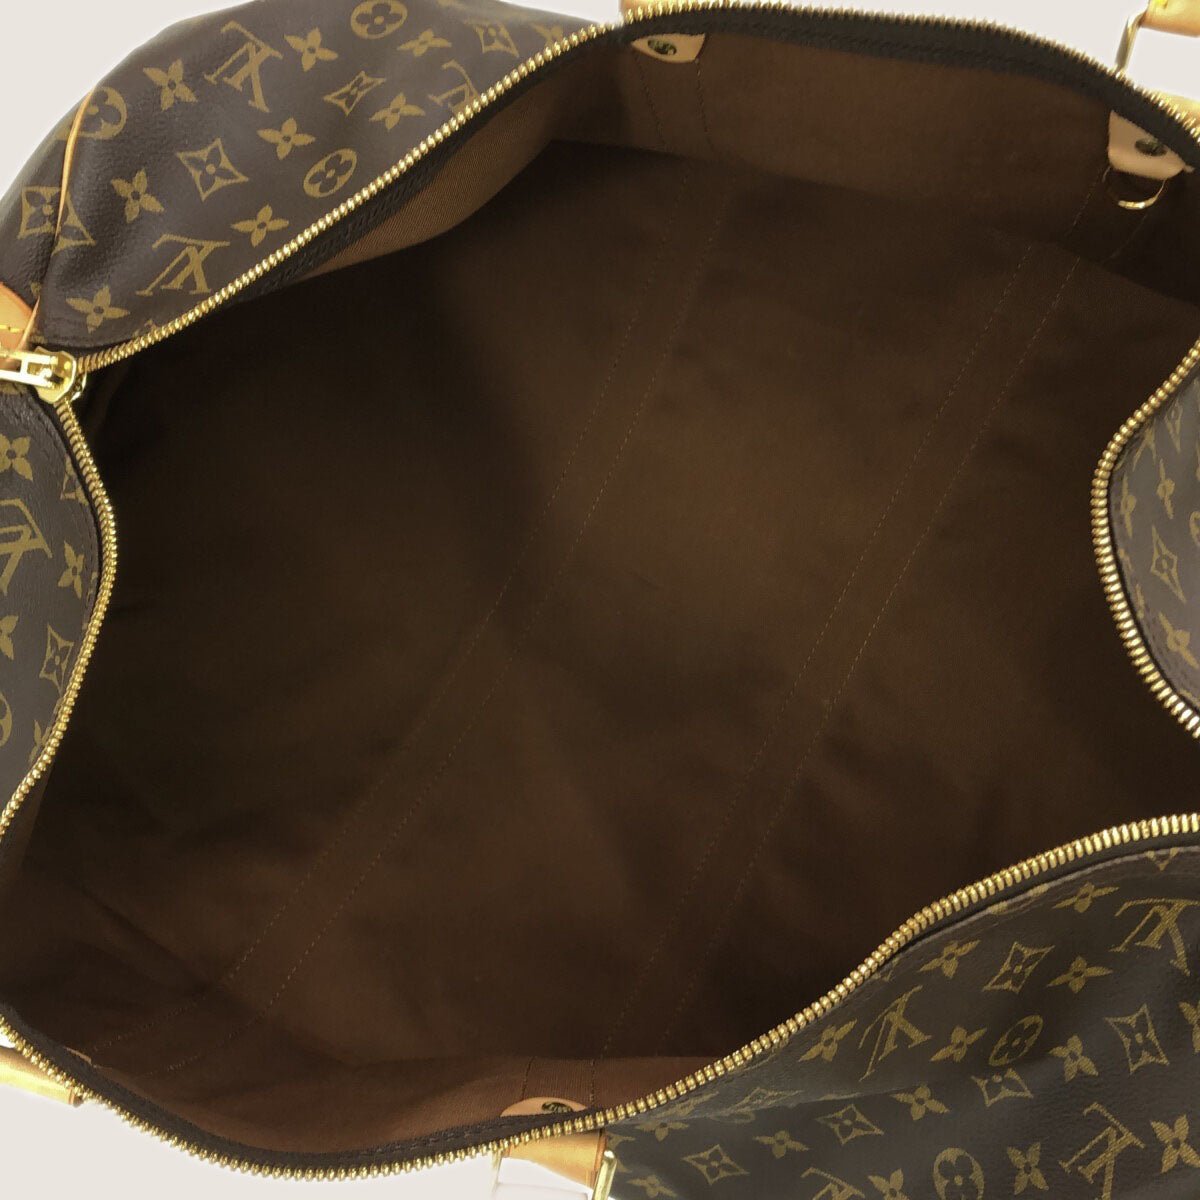 Keepall 55 Bag - LOUIS VUITTON - Affordable Luxury image